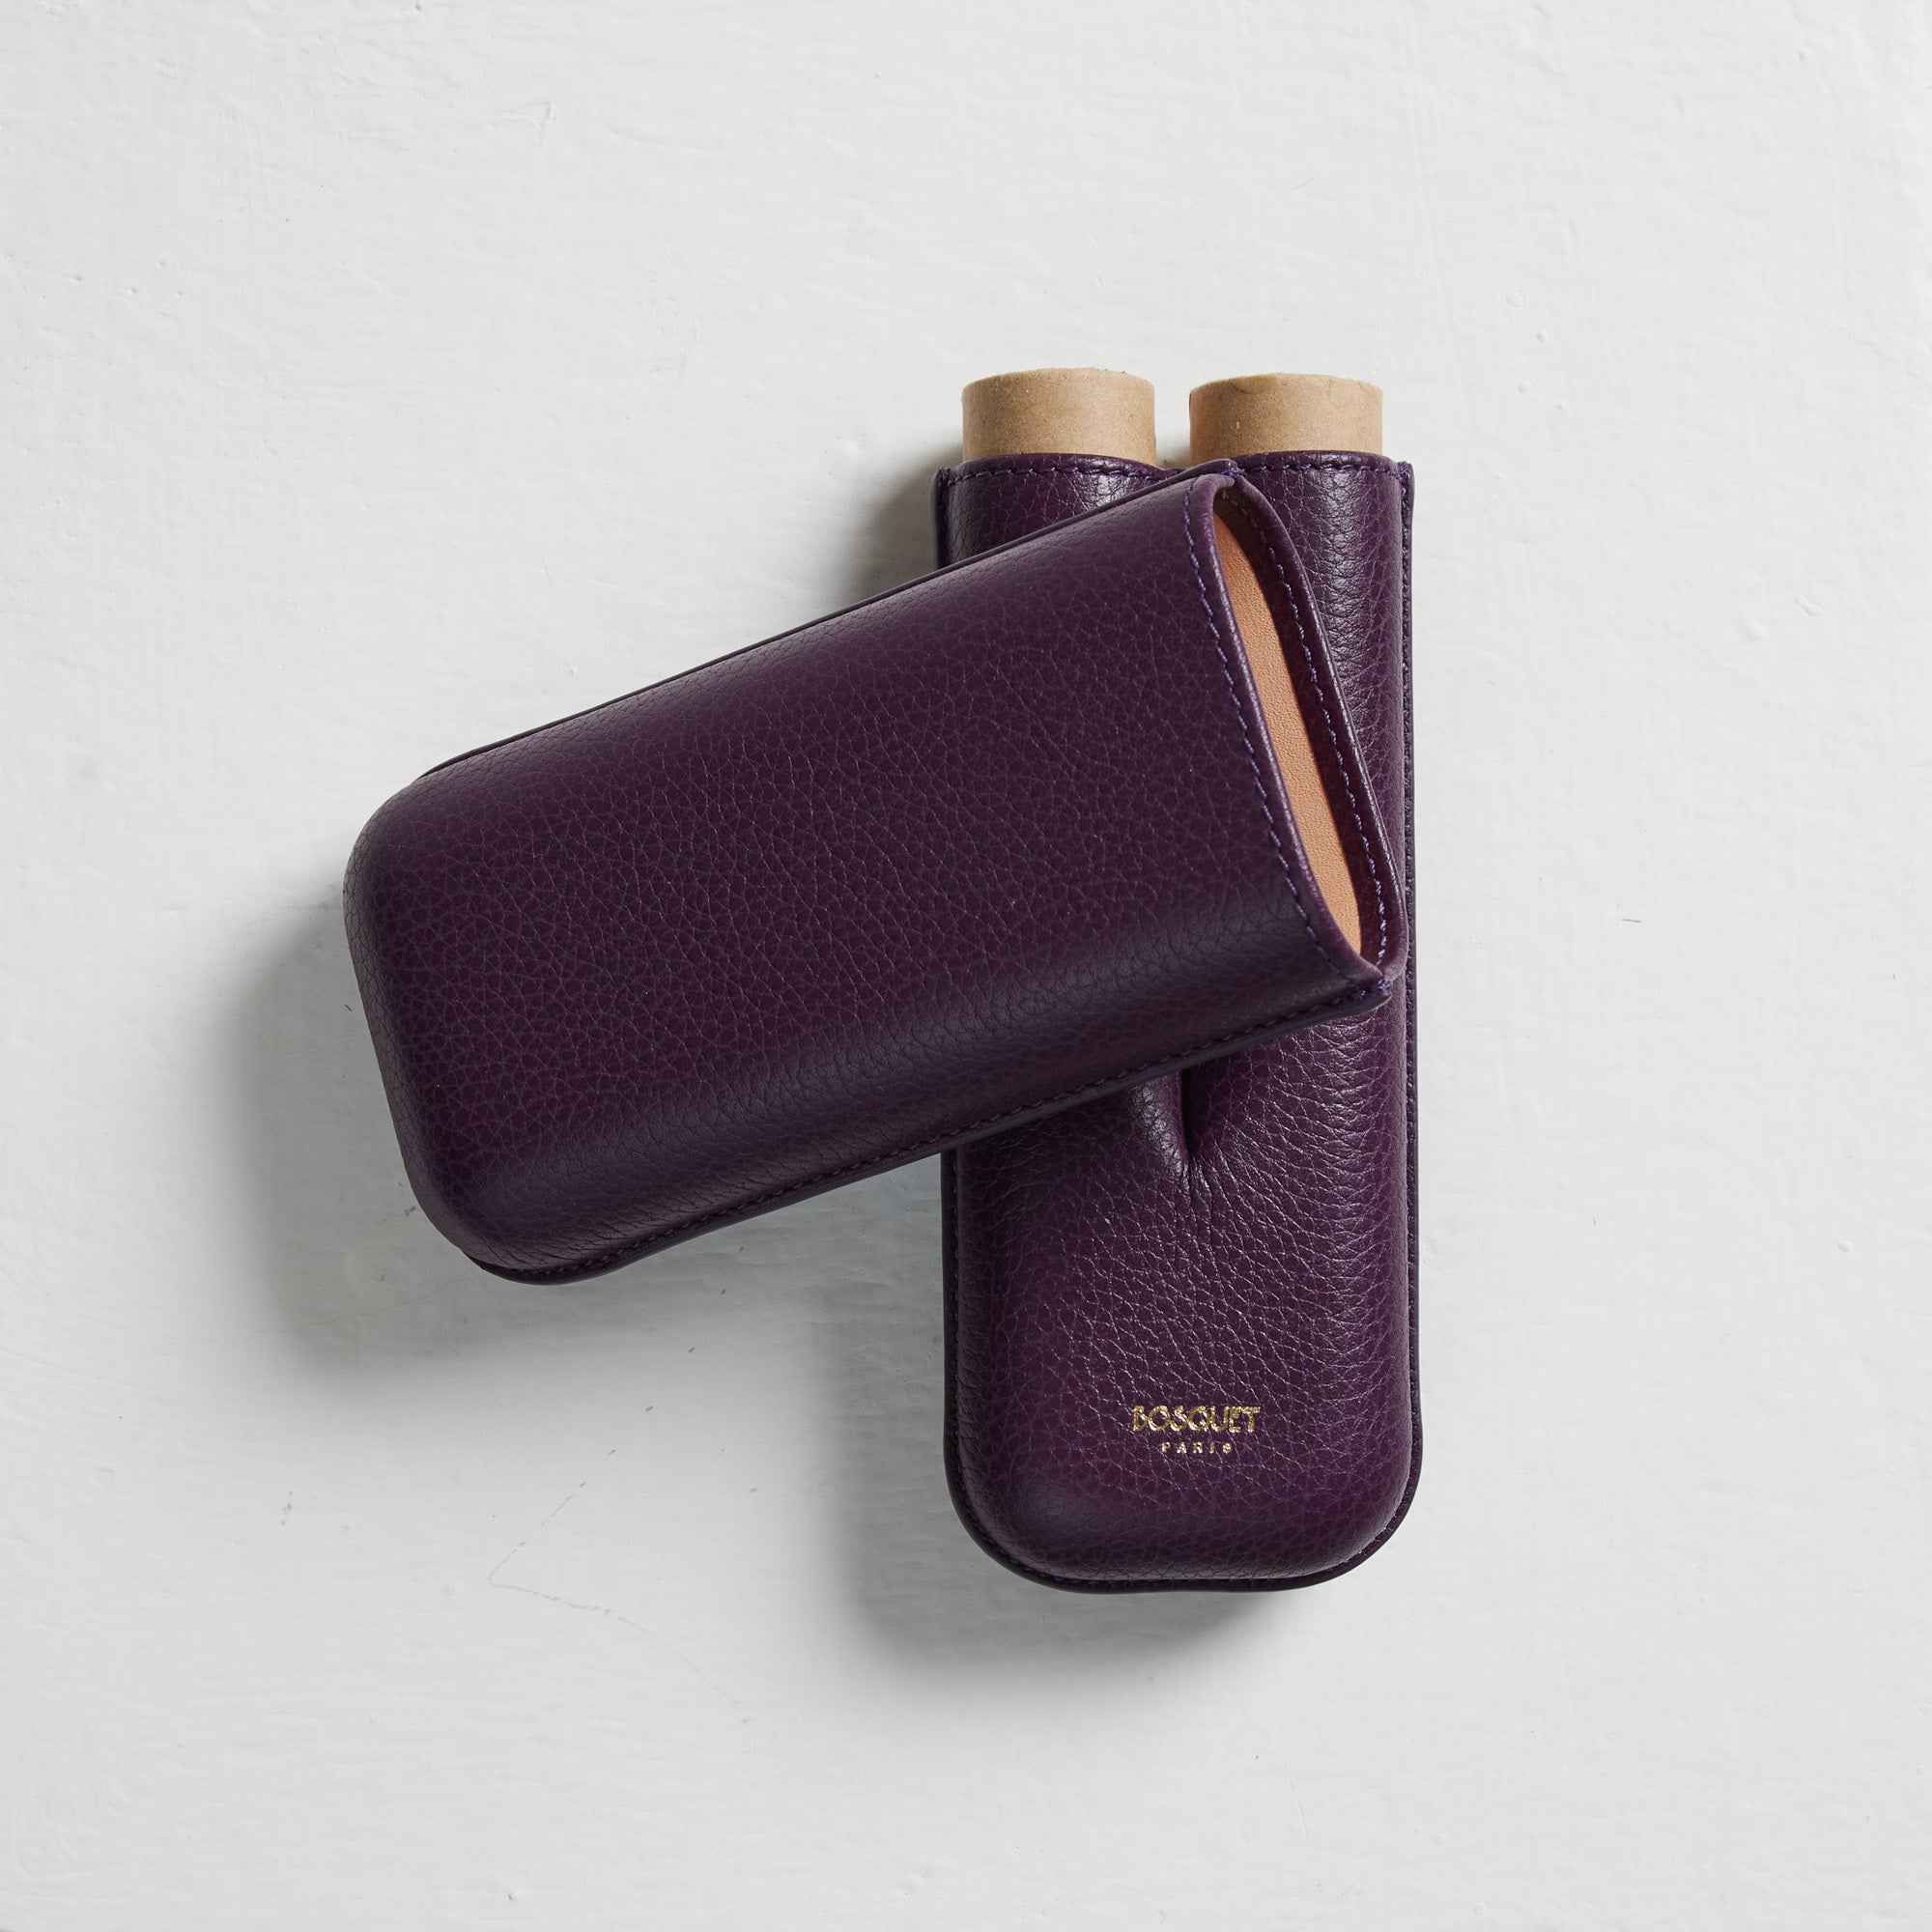 A pair of Bosque Smooth Purple Leather Cigar Cases on a white surface.